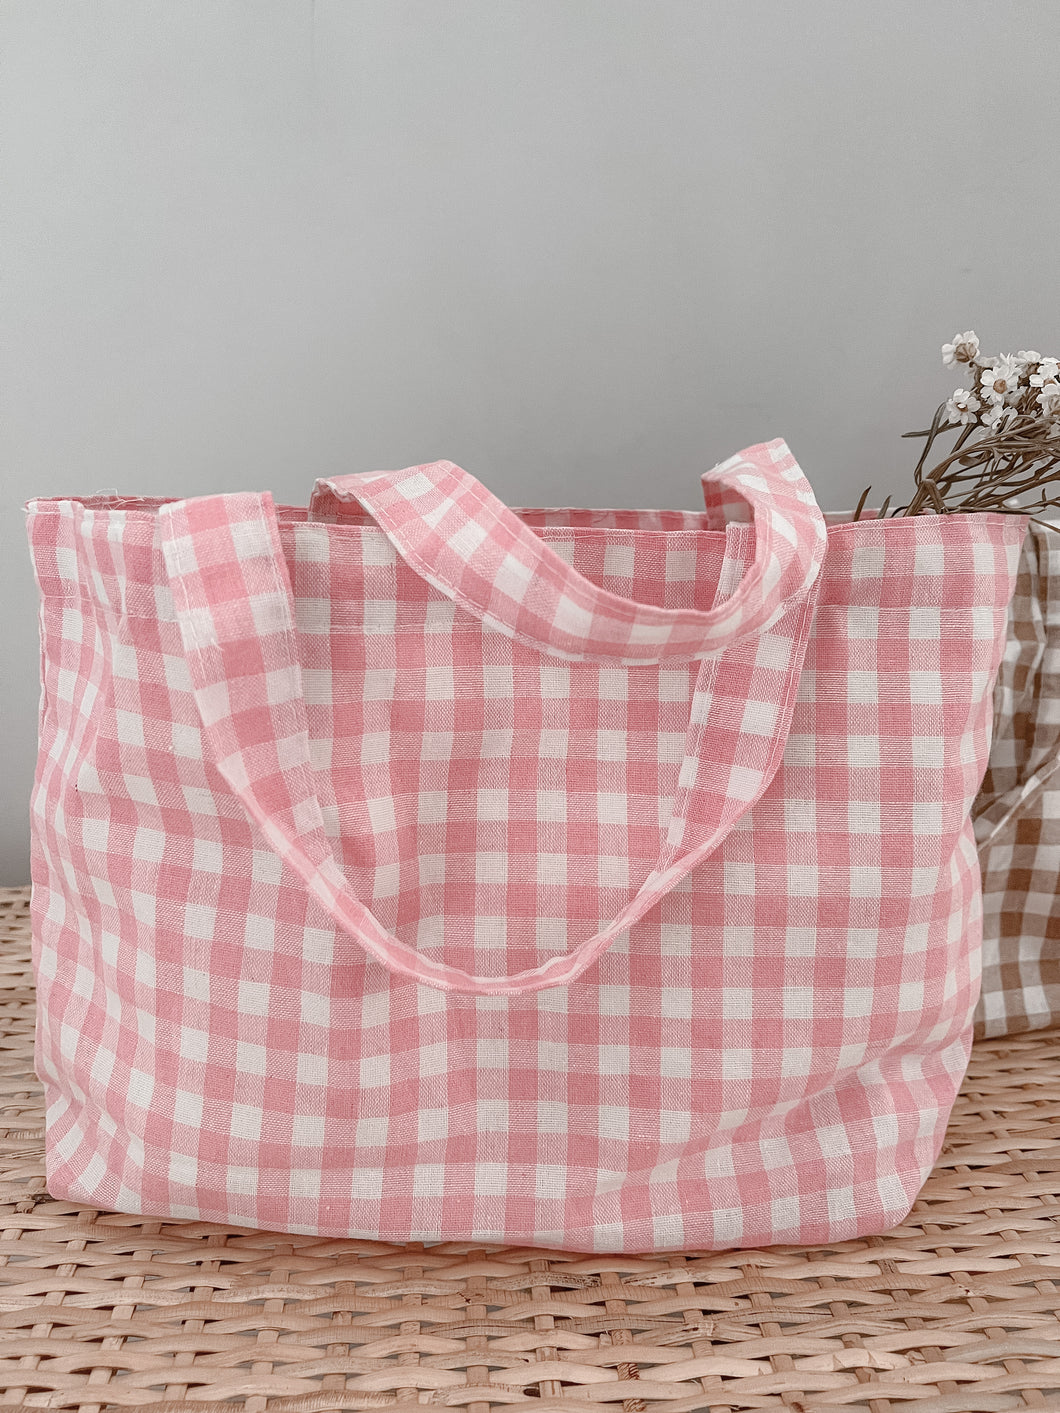 Gingham tote